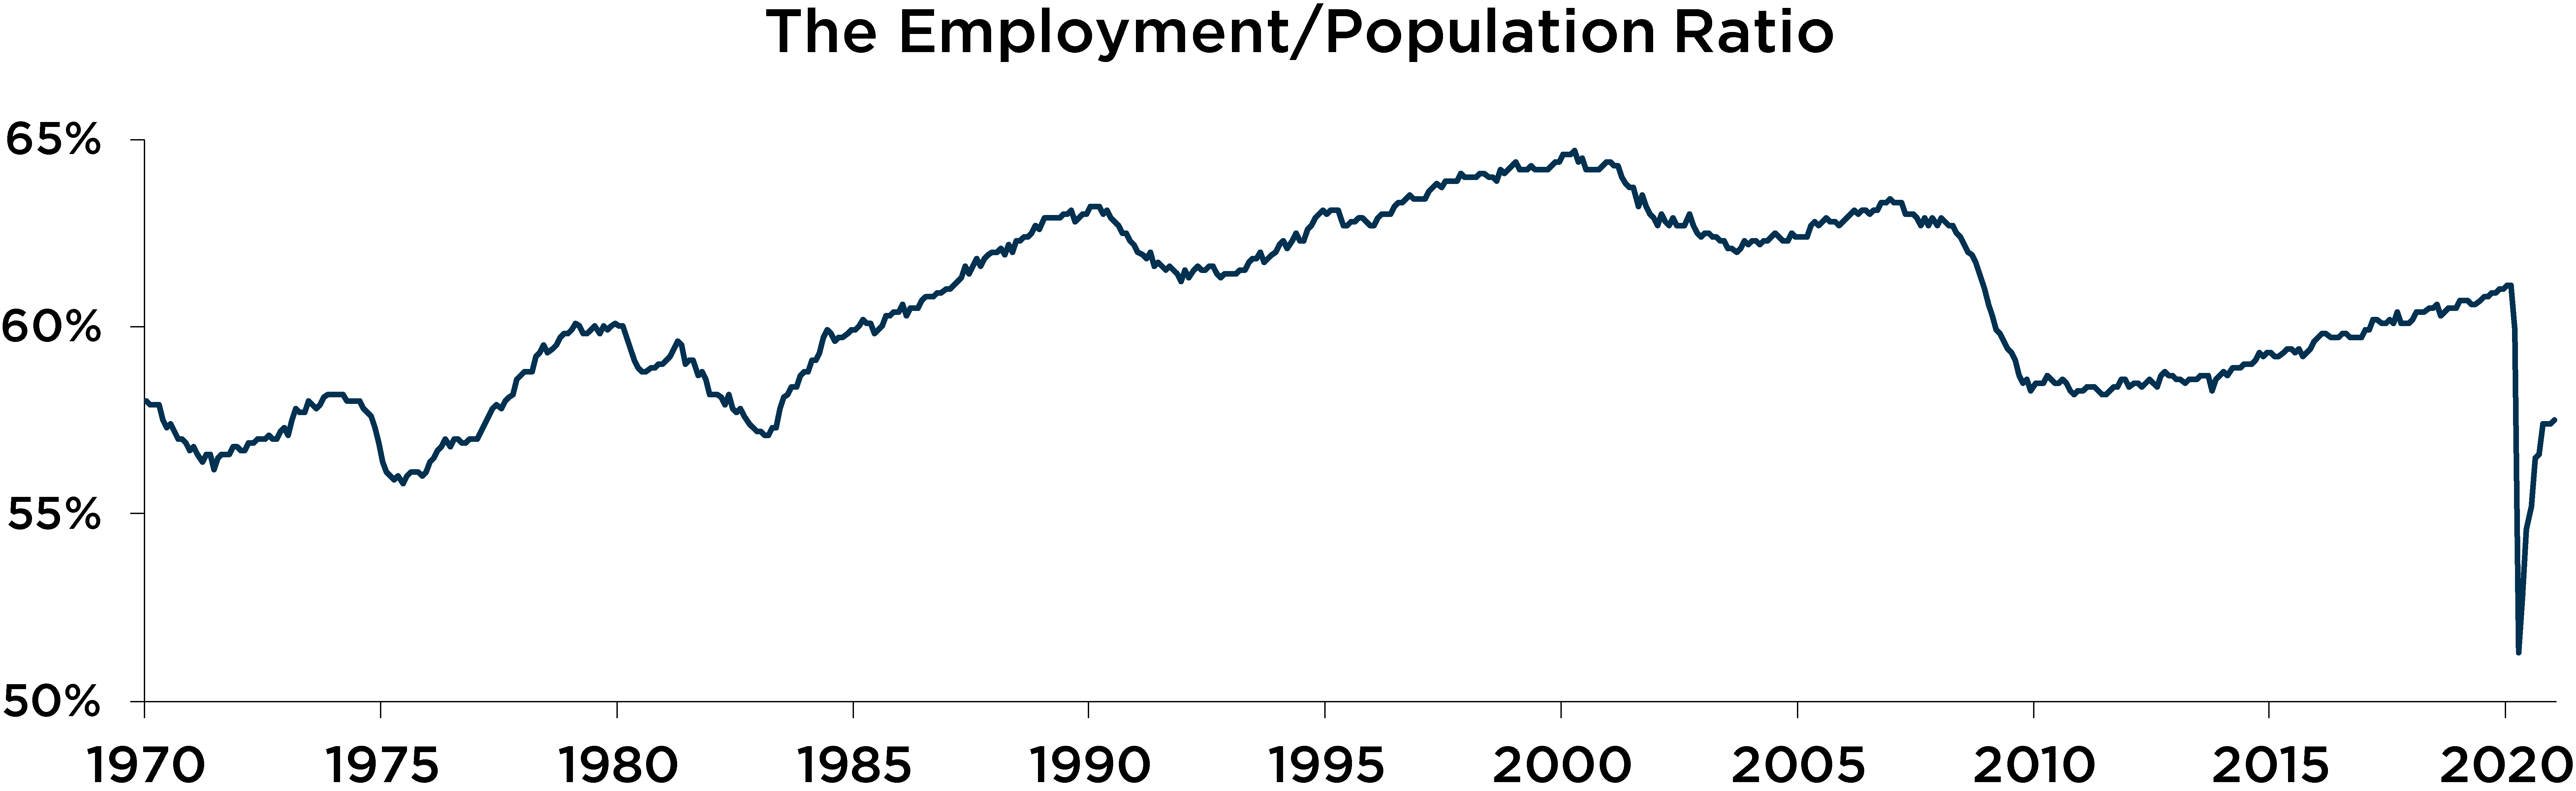 Graph depicting the employment/population ratio